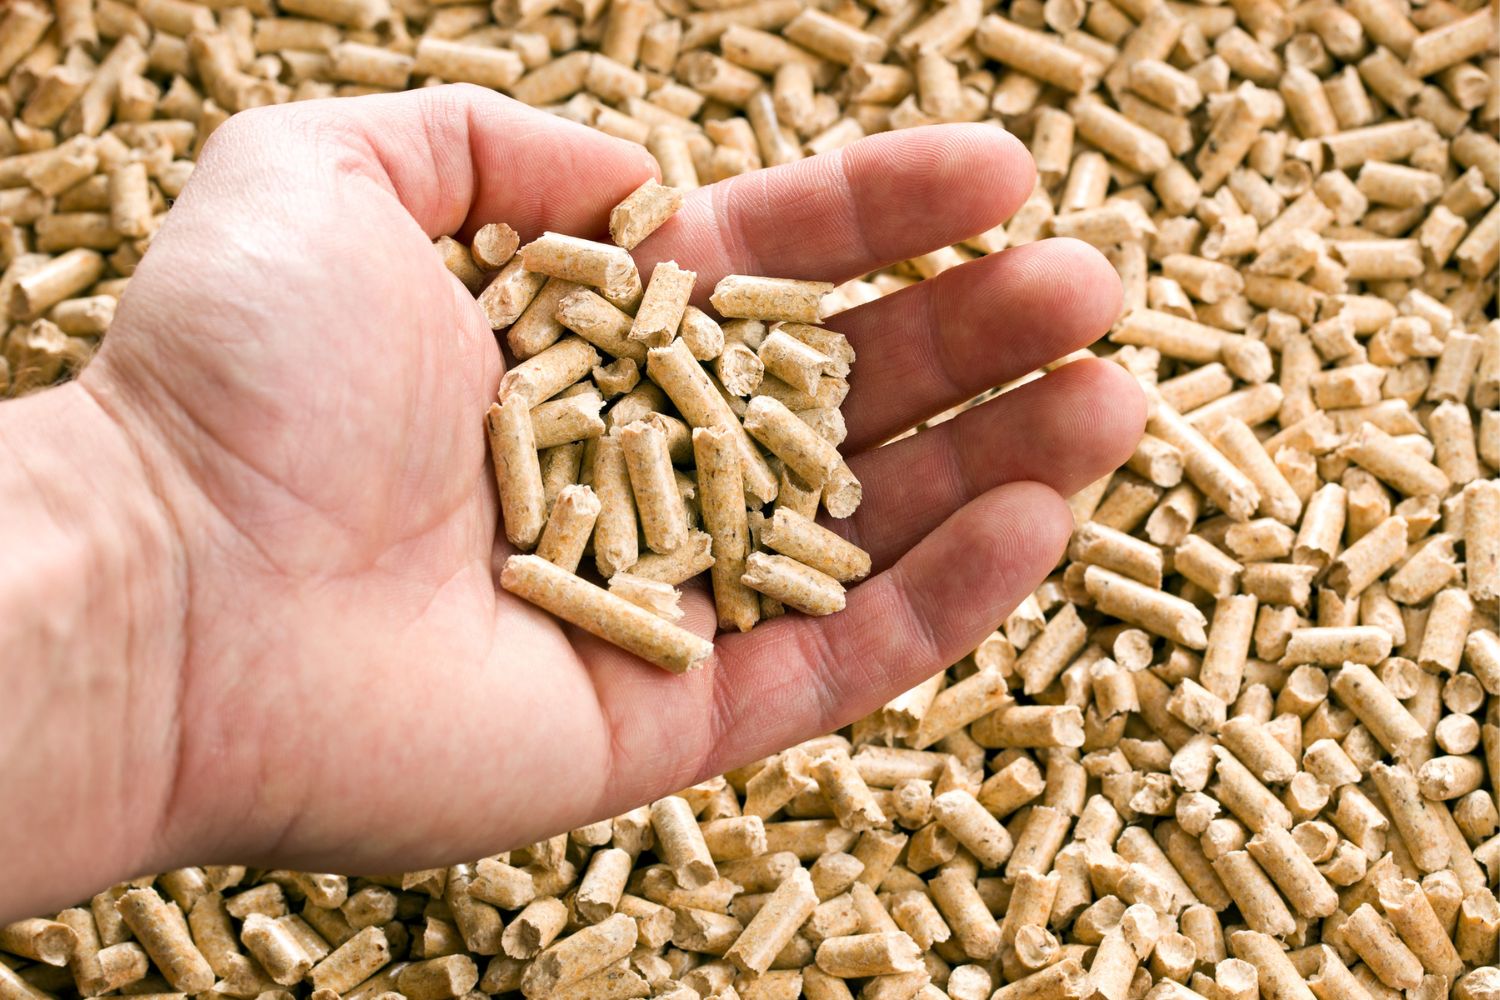 The Best Wood Pellet Delivery Services Option: Woodpellets.com